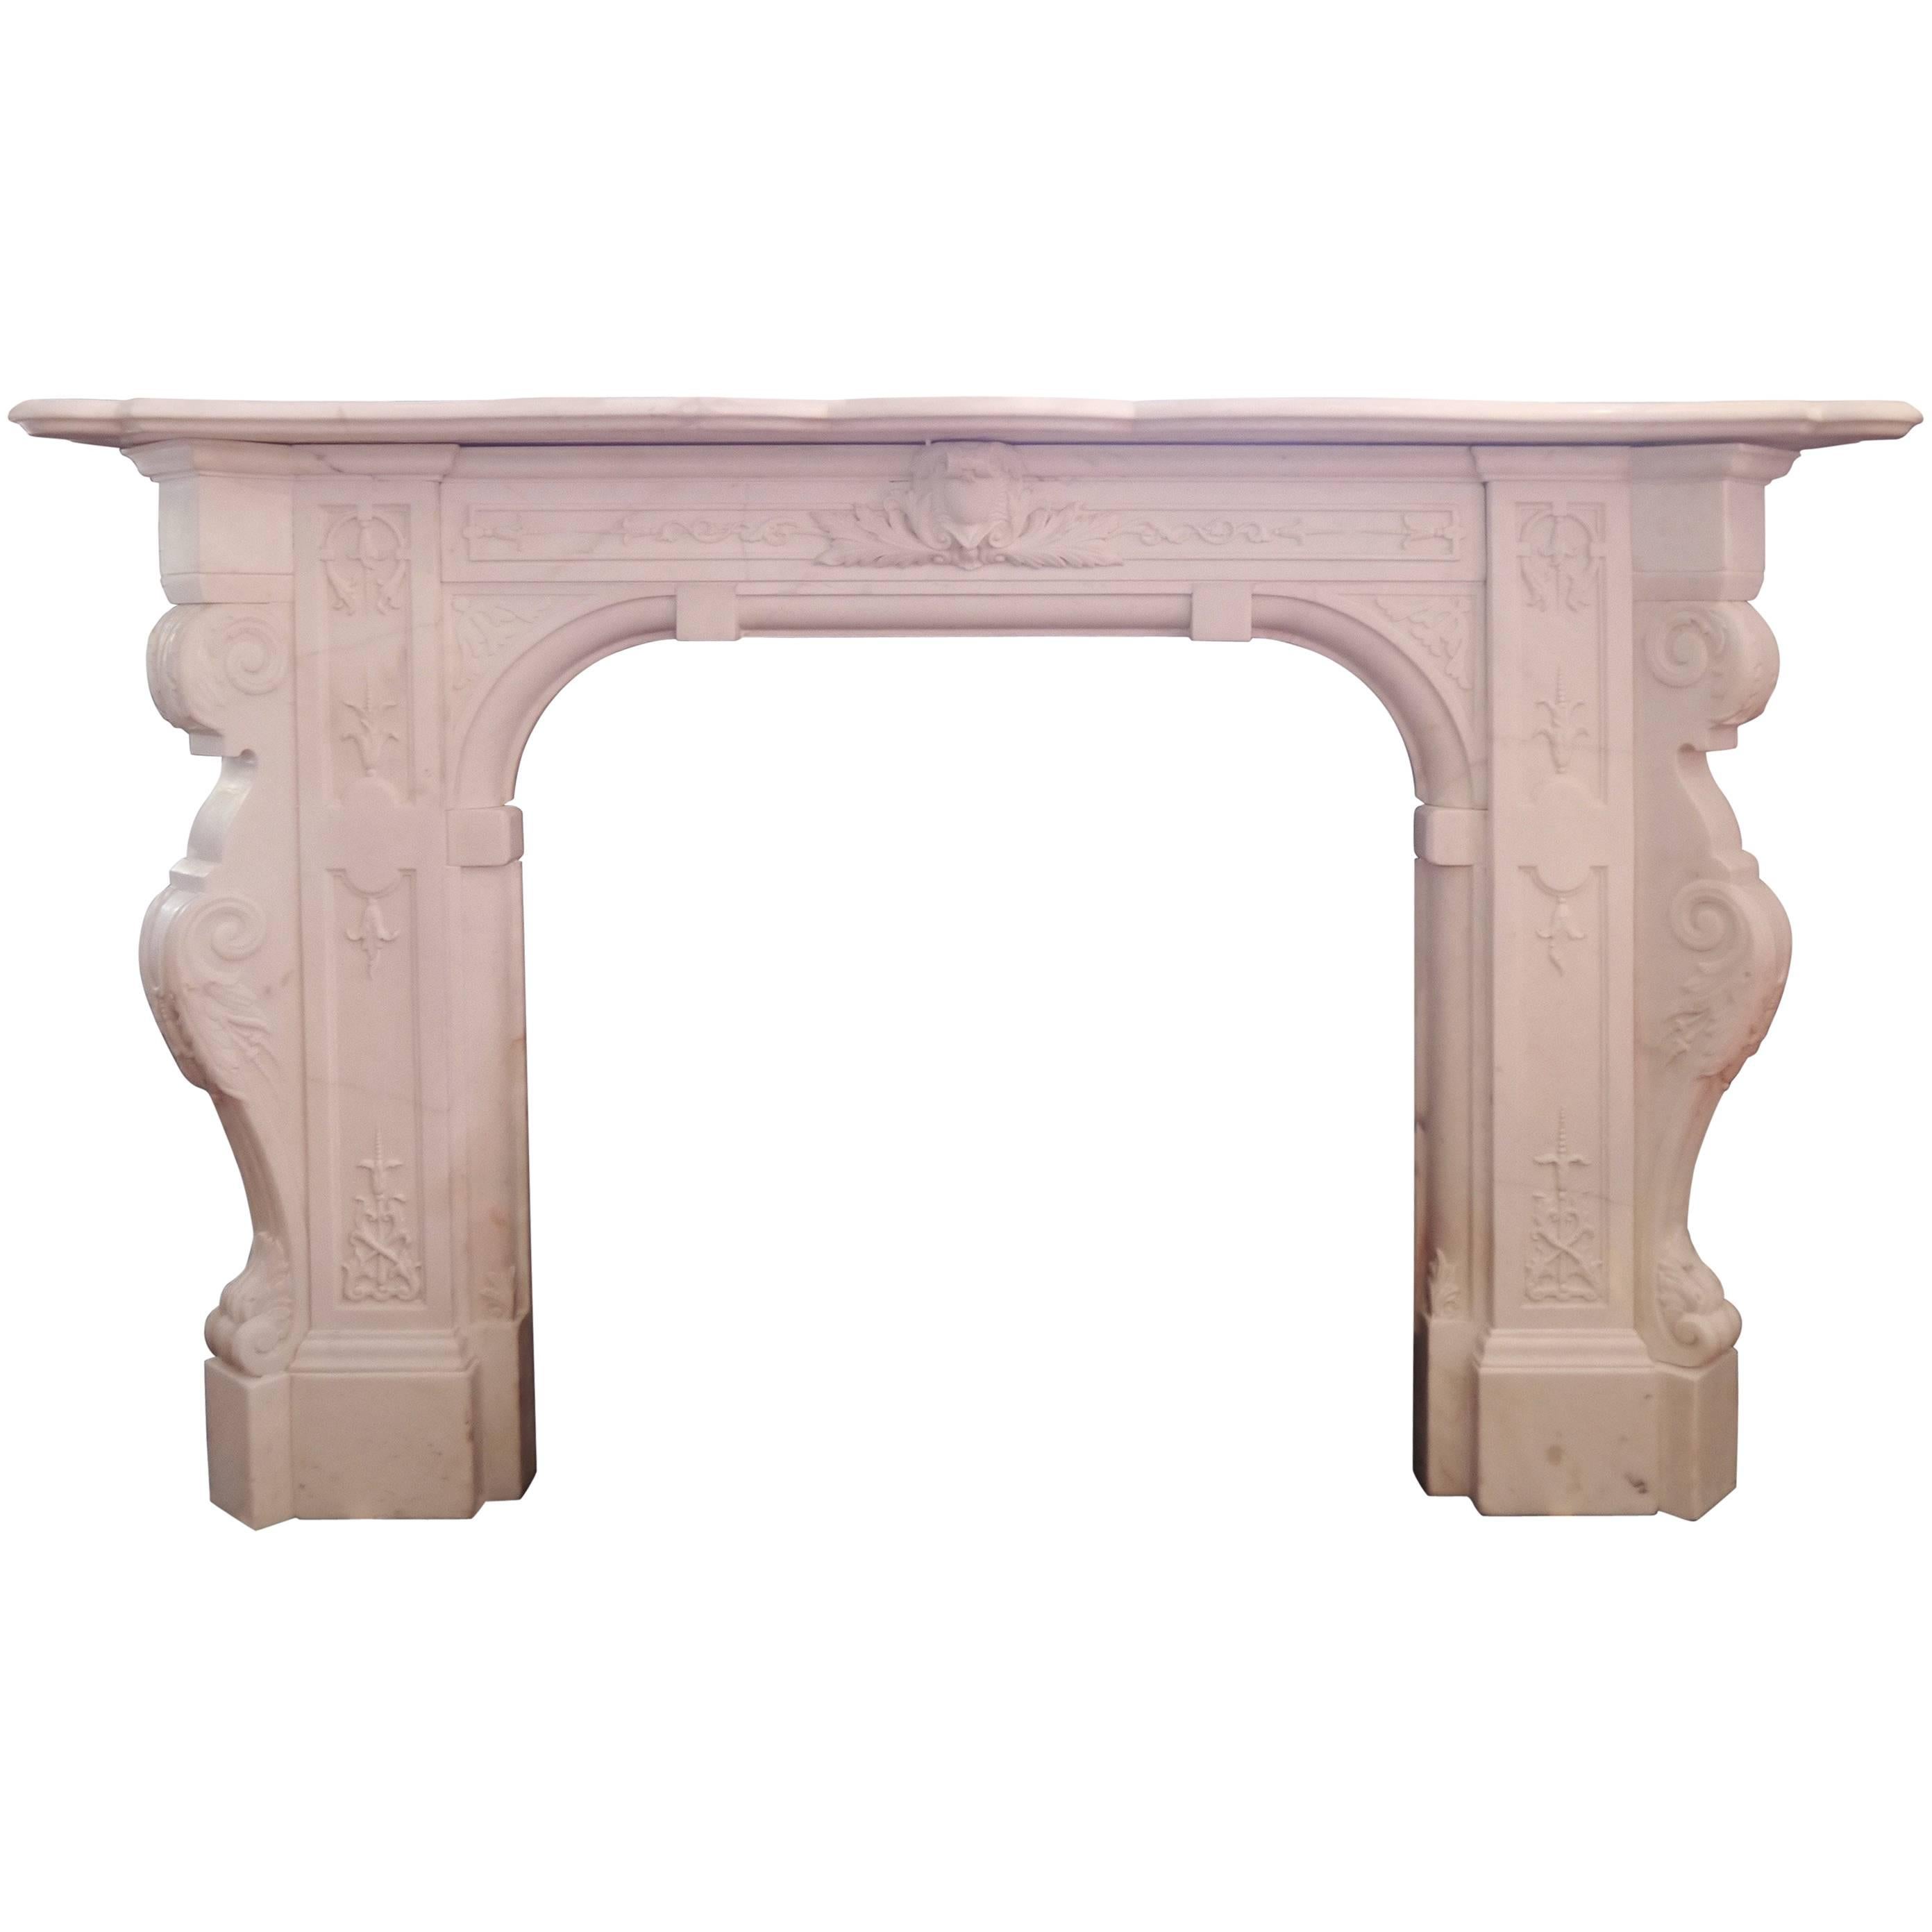 Antique Victorian Statuary White Marble Fireplace For Sale